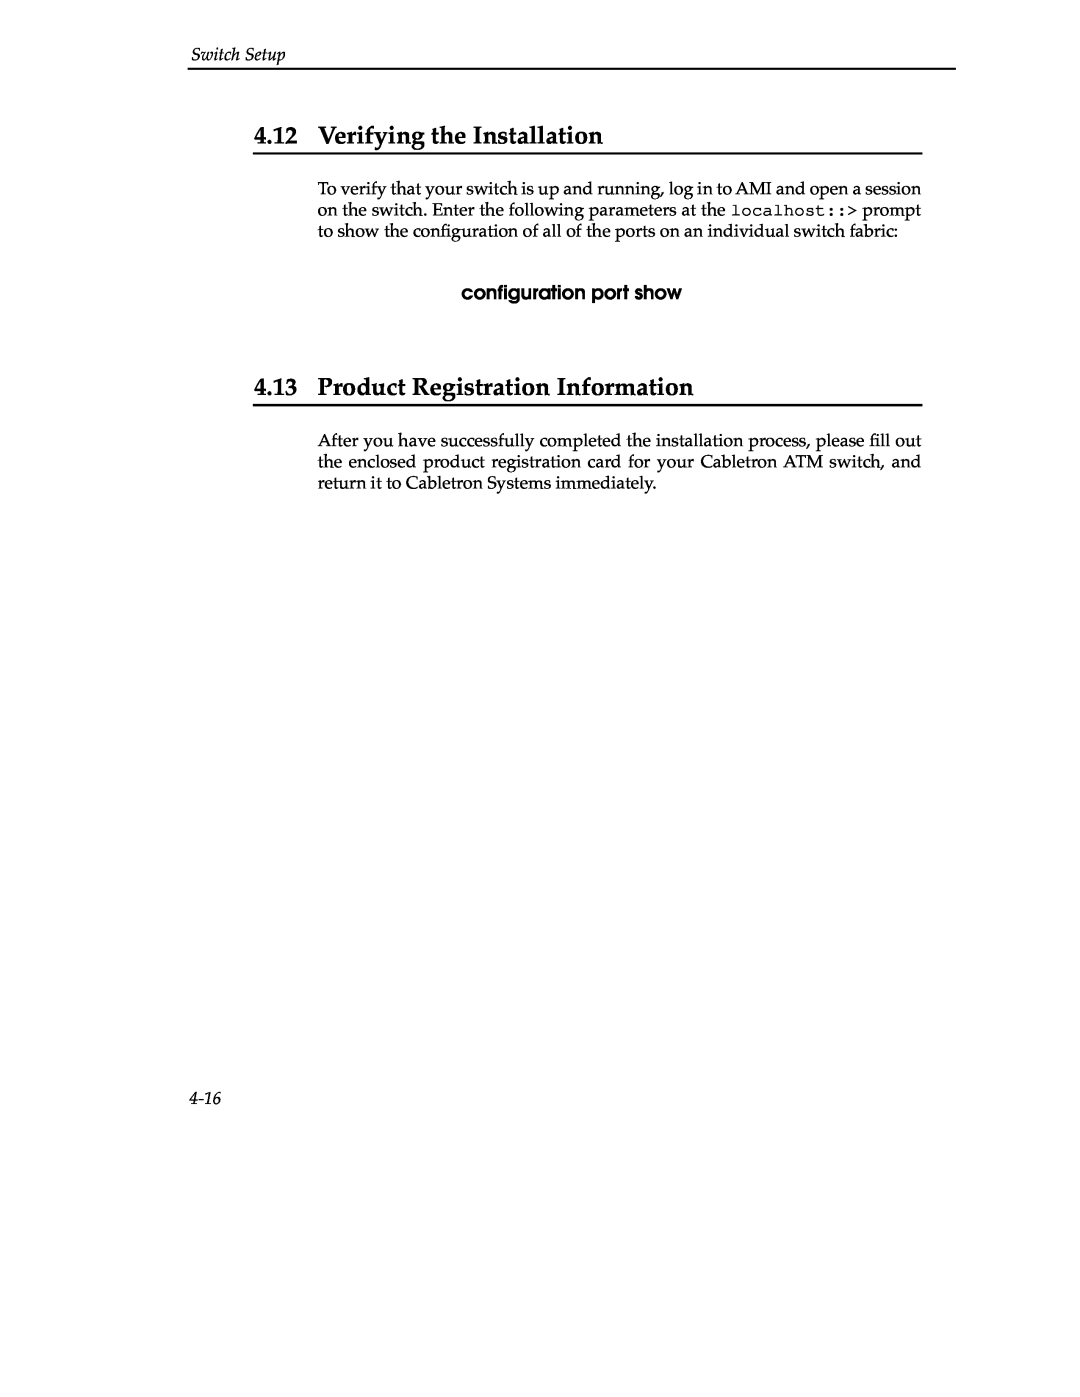 Cabletron Systems 9A000 manual Verifying the Installation, Product Registration Information, conﬁguration port show, 4-16 